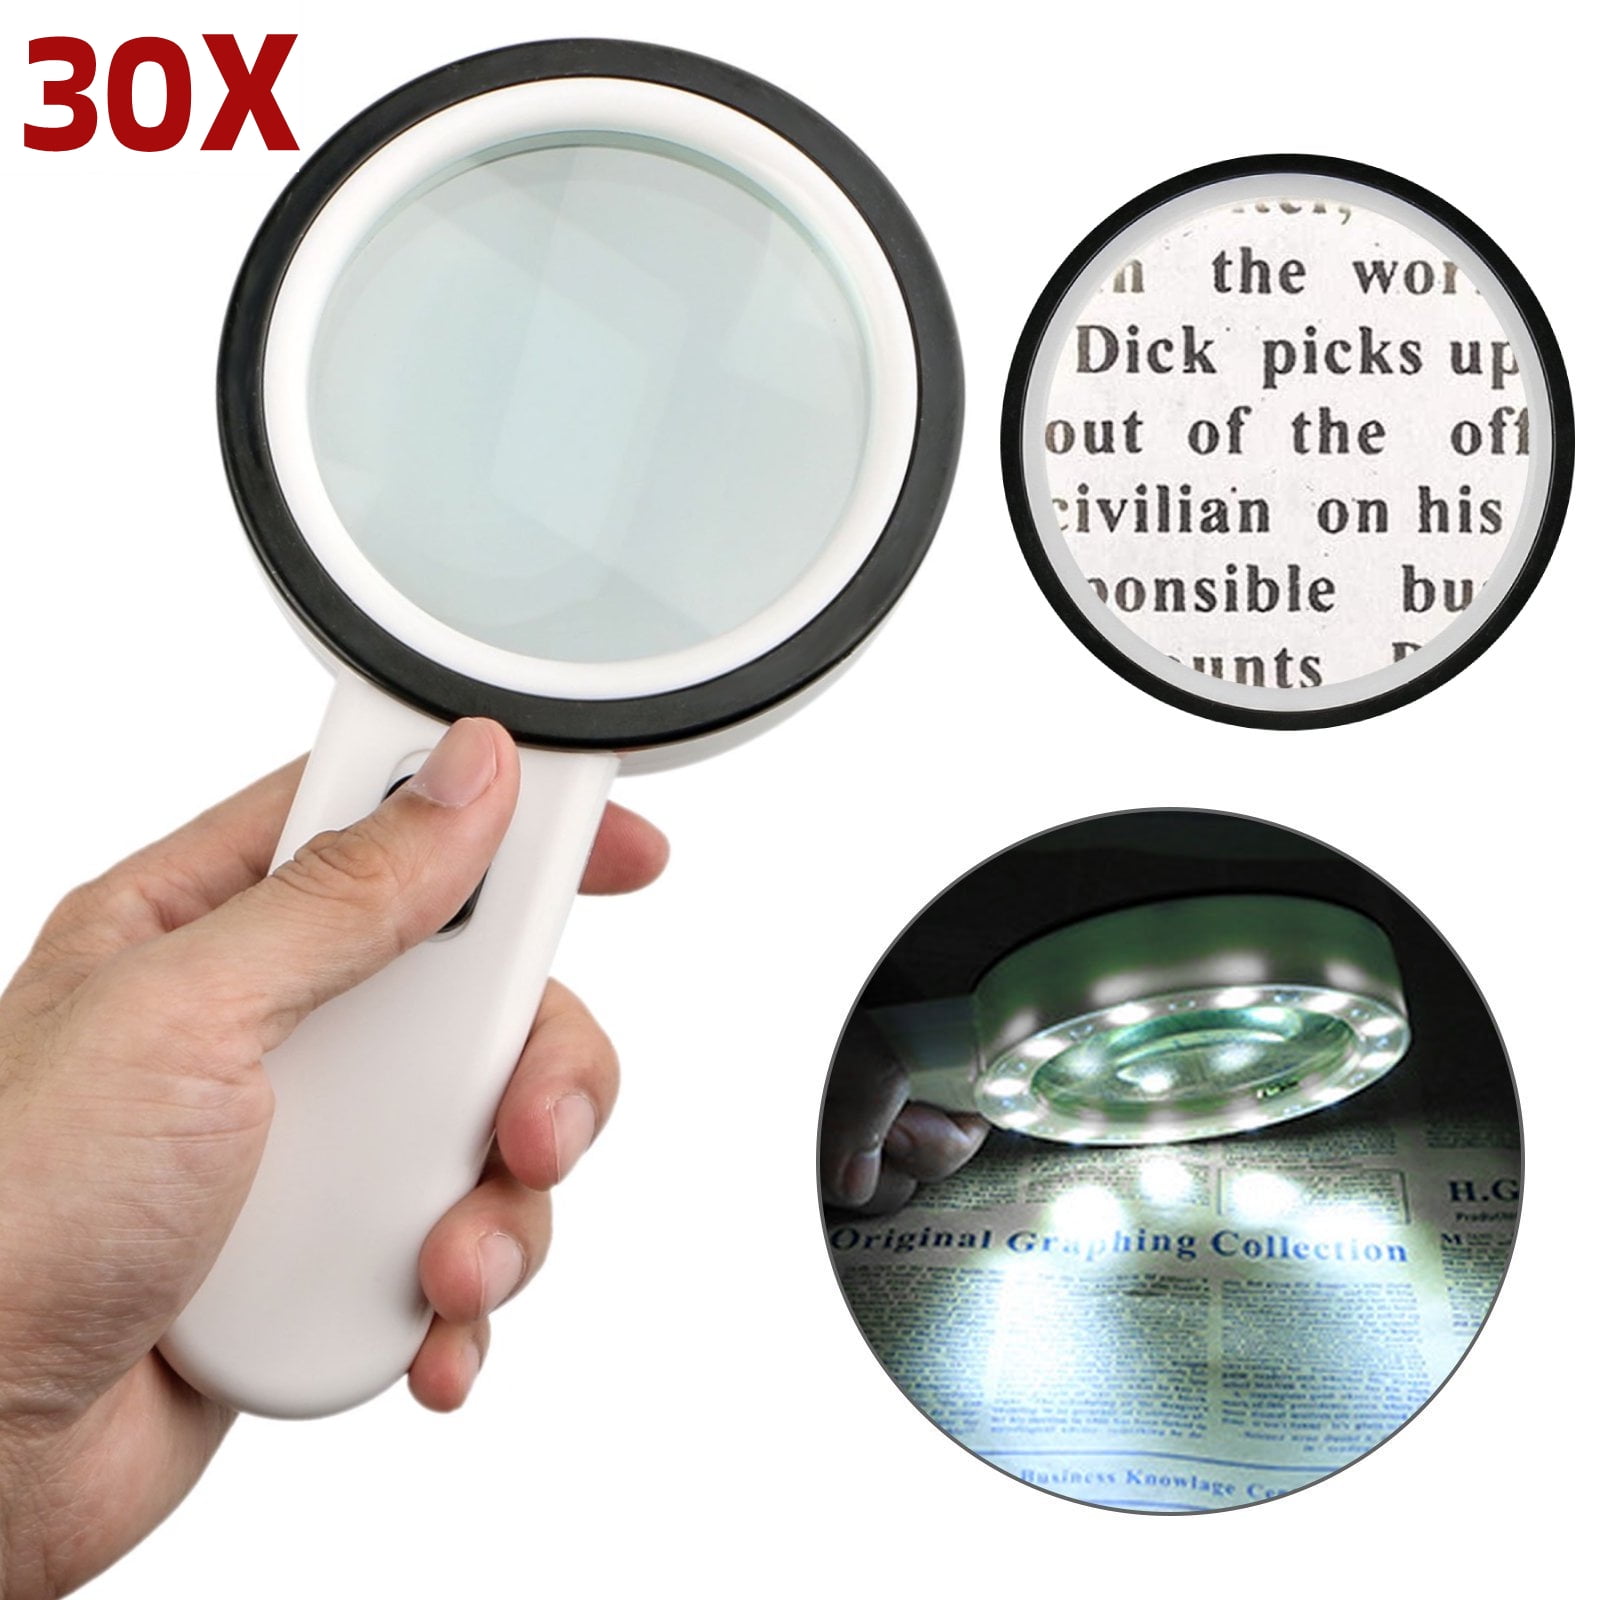 Hand-held Magnifying Glass HD Glass high Power Optical Magnifying Glass Reading Magnifying Glass Magnifier for Reading Magnifying Glass with Light and Stand Magnifying Glass